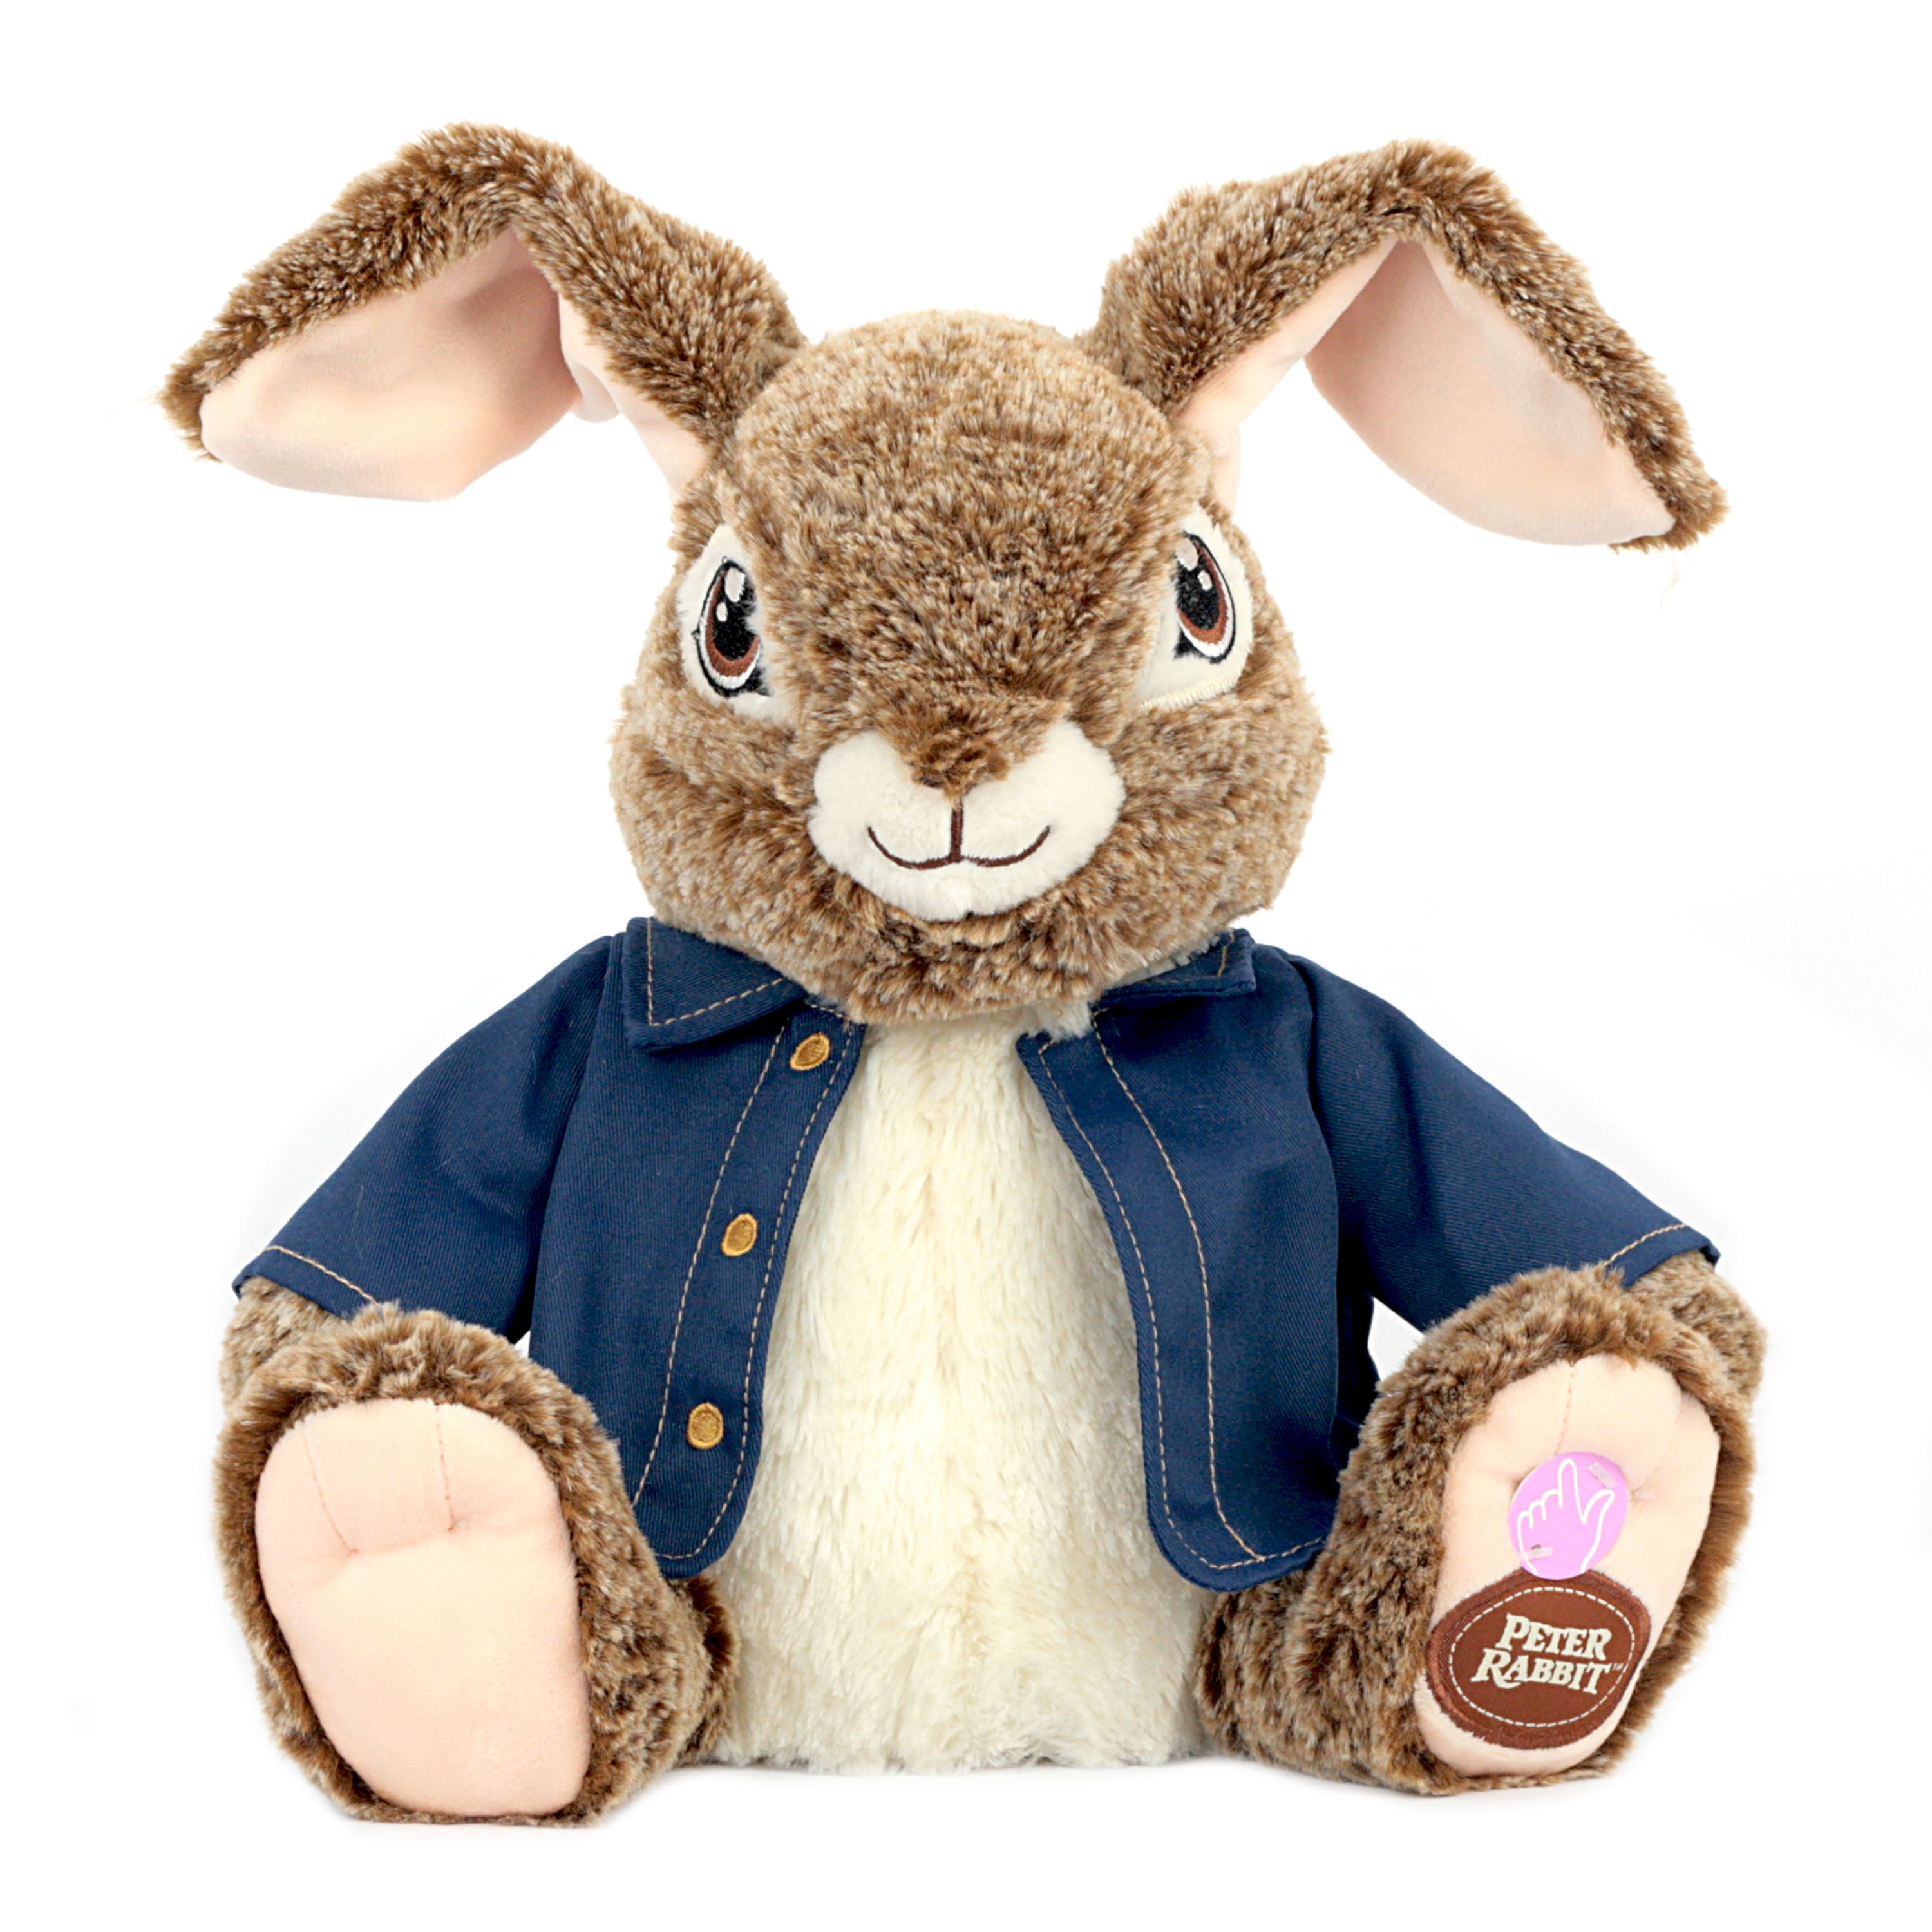 NEW OFFICIAL 8" PETER RABBIT SOFT PLUSH TOY PETER 